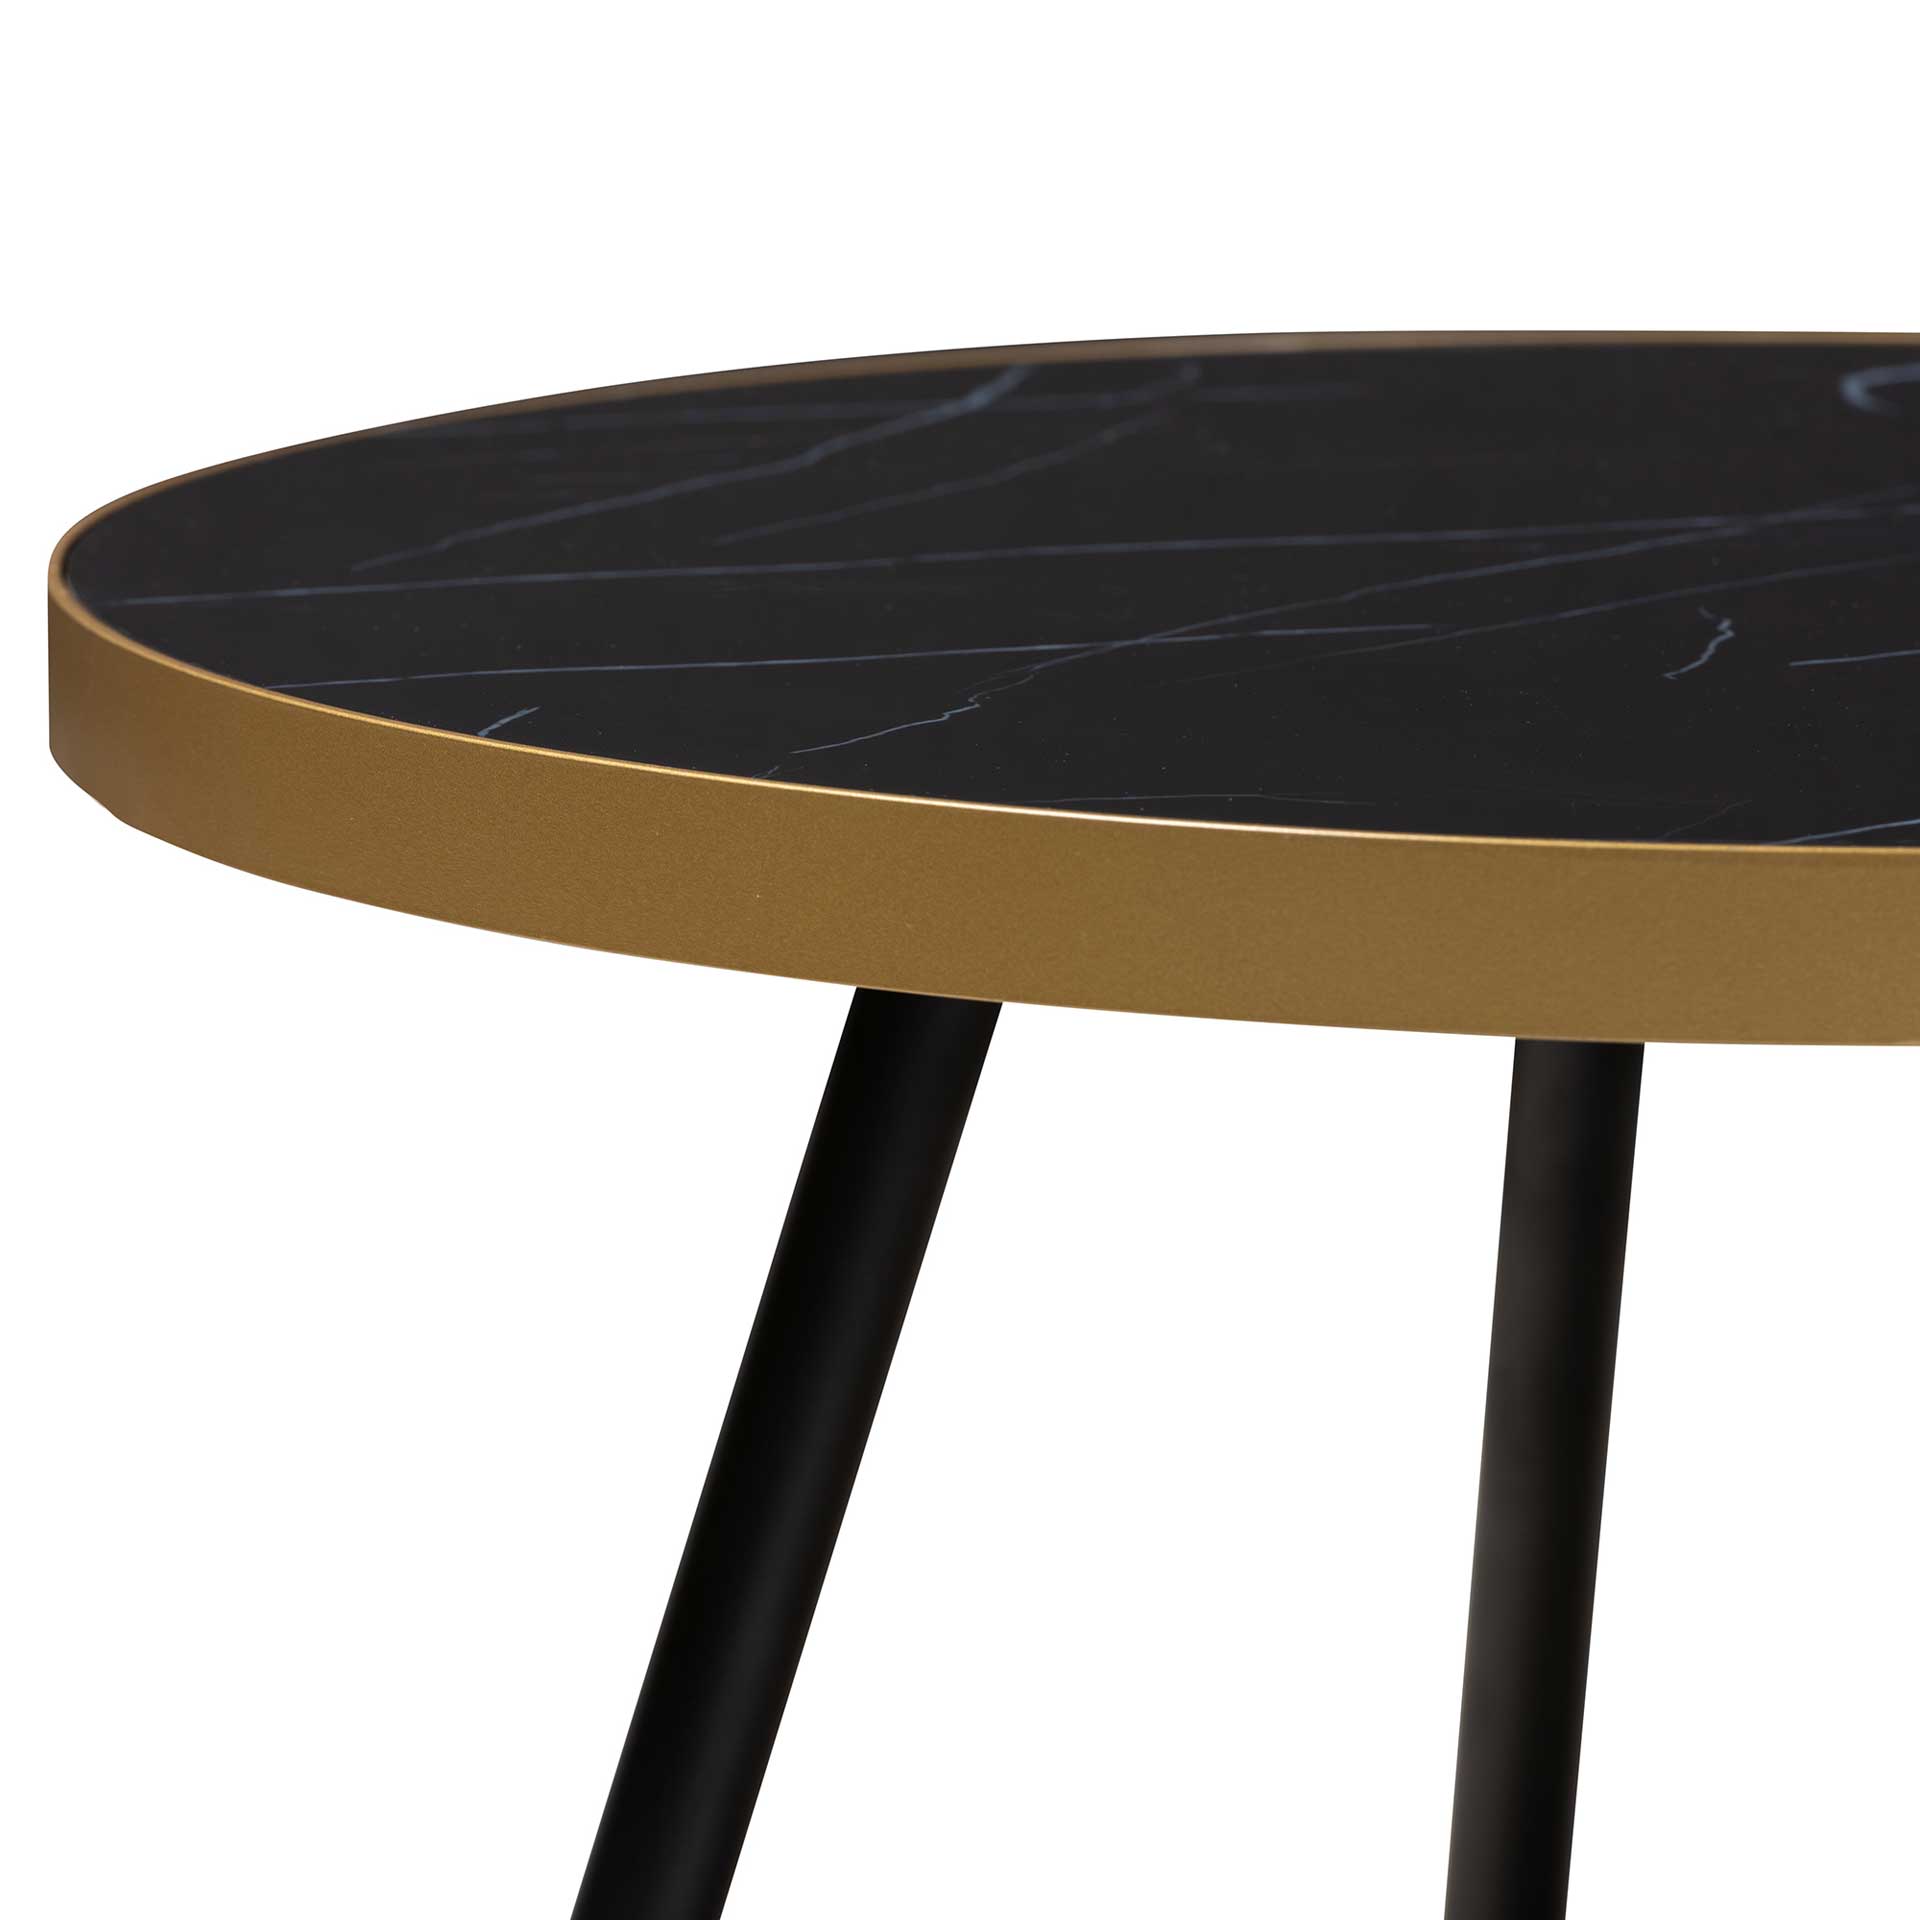 Seattle Marble/Metal Coffee Table Black/Gold